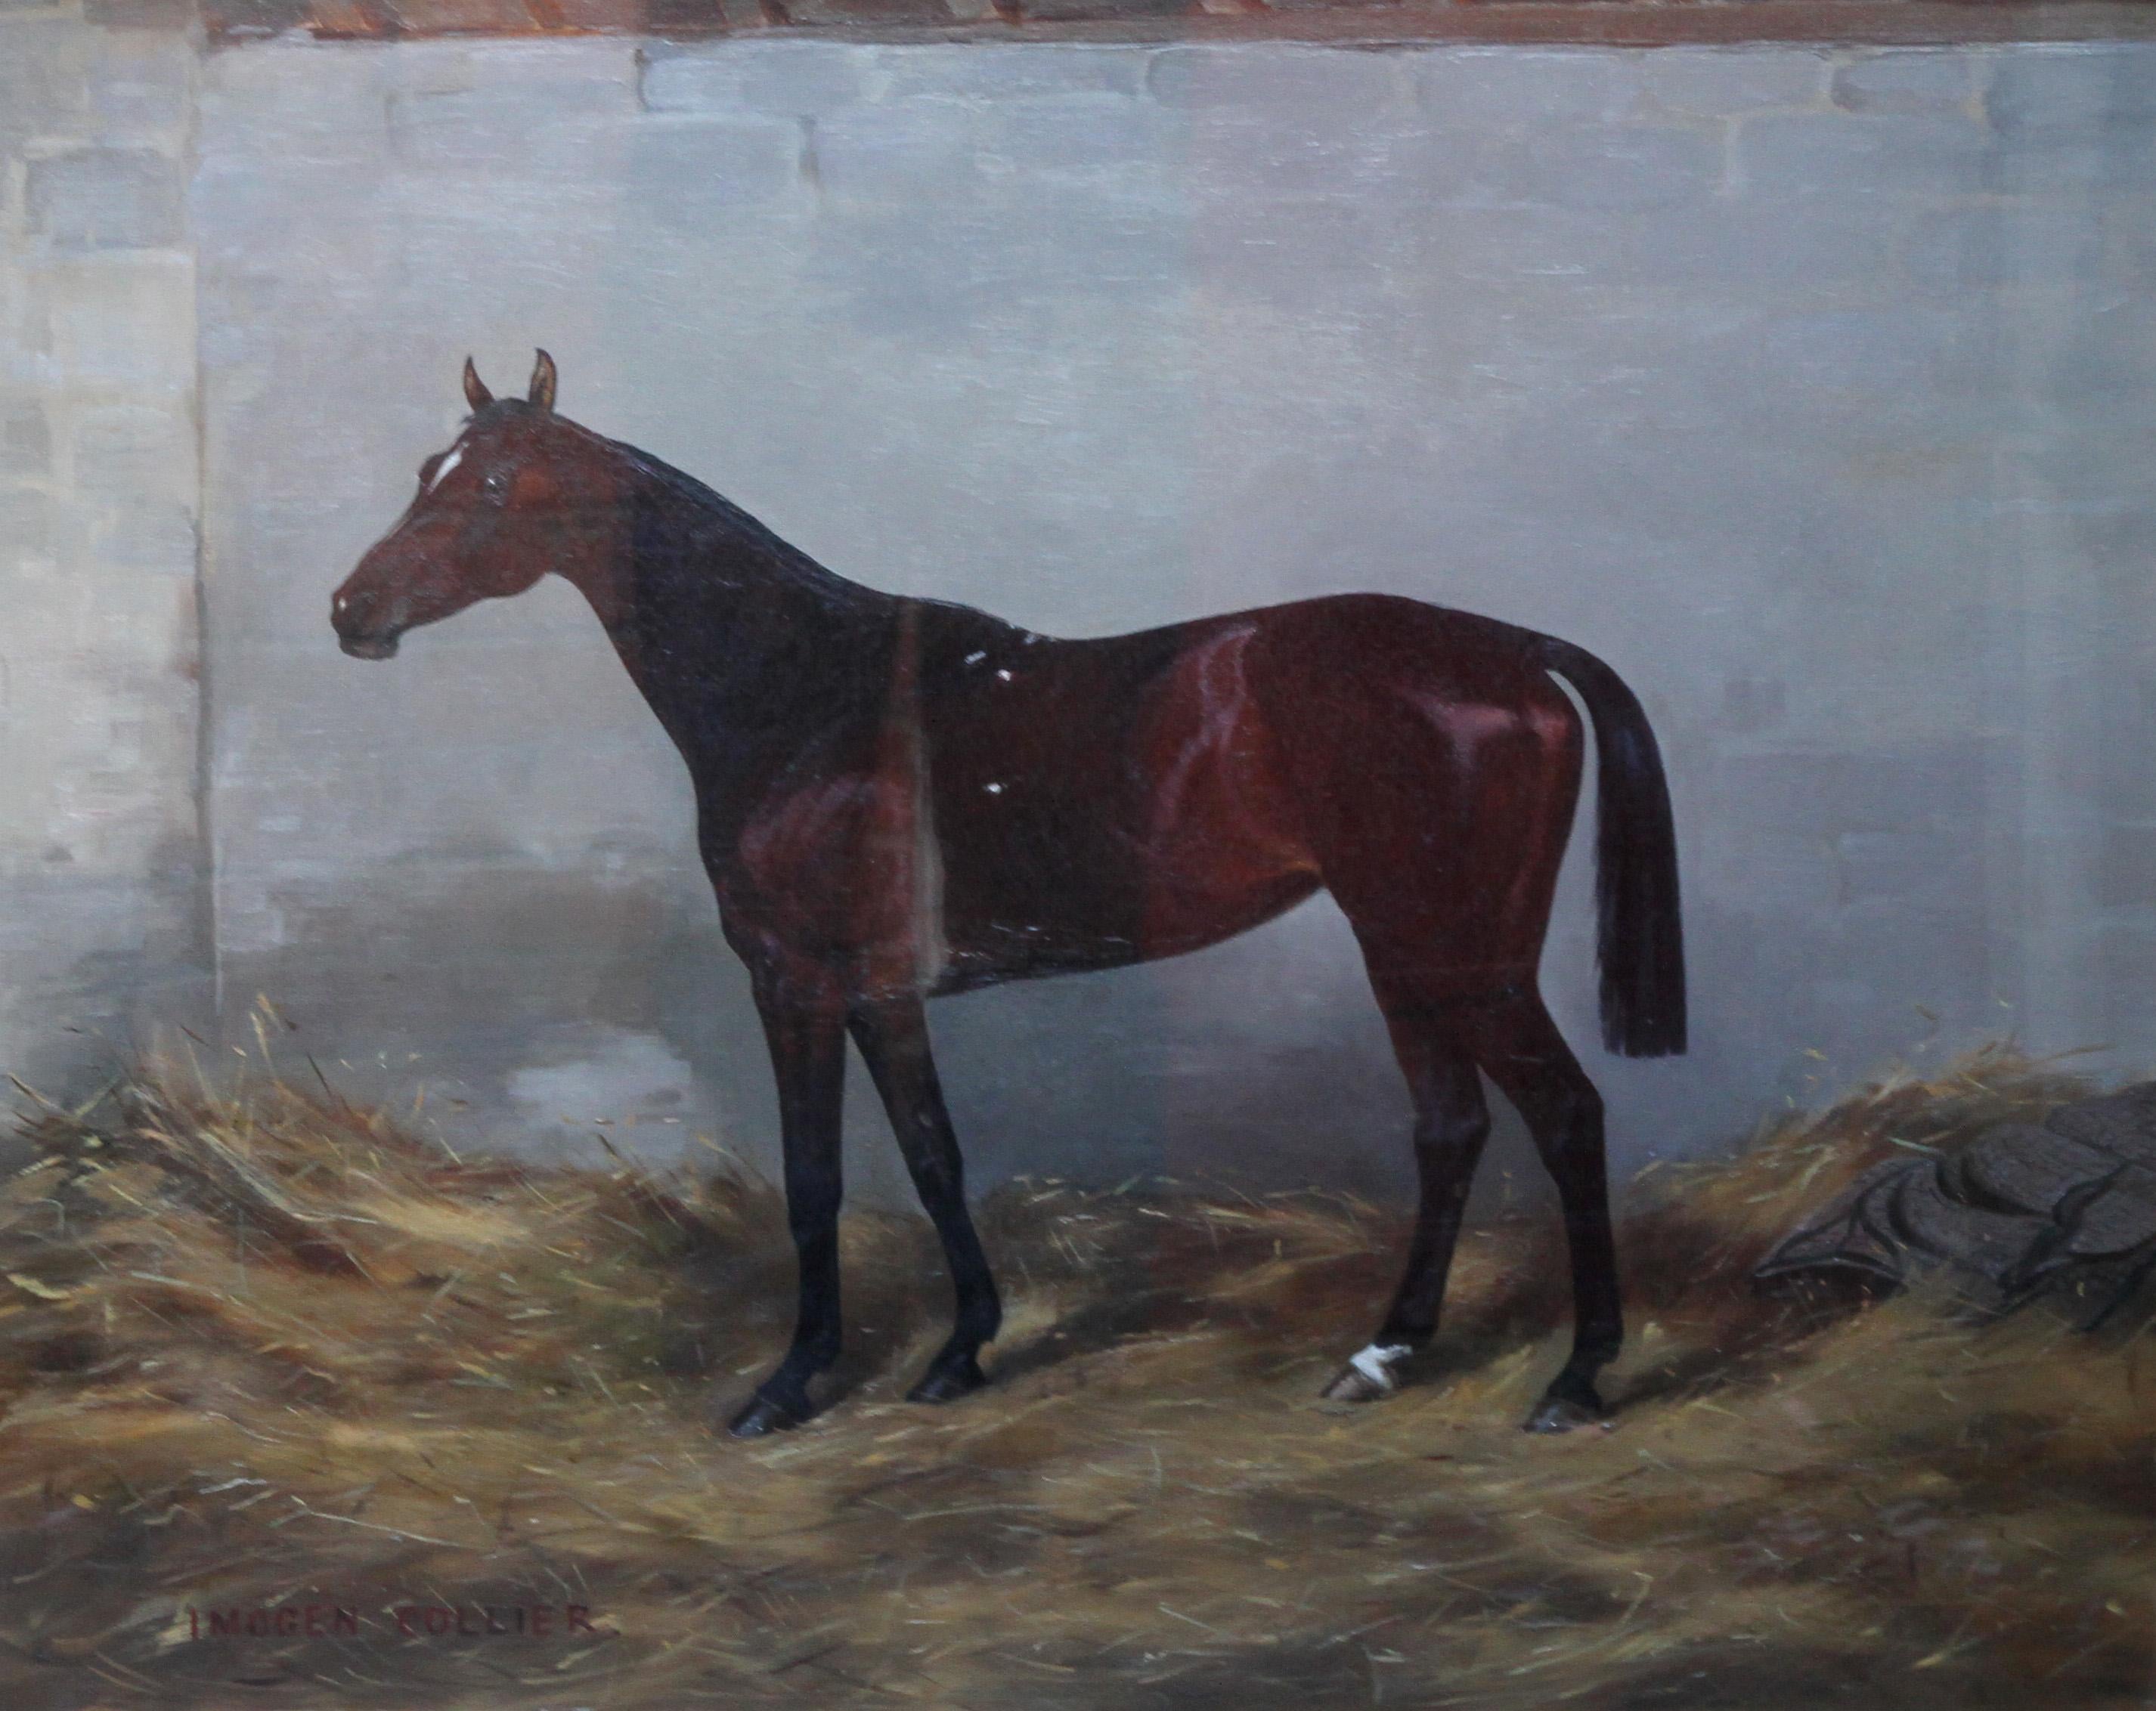 This lovely race horse oil painting is by female horse artist and horse breeder Imogen Mary Collier, of Foxhams Stud, Dartmoor. The horse's name is Honeys and we can see from Foxhams Stud website that Honeys was 'brown, white blaze, white off hind